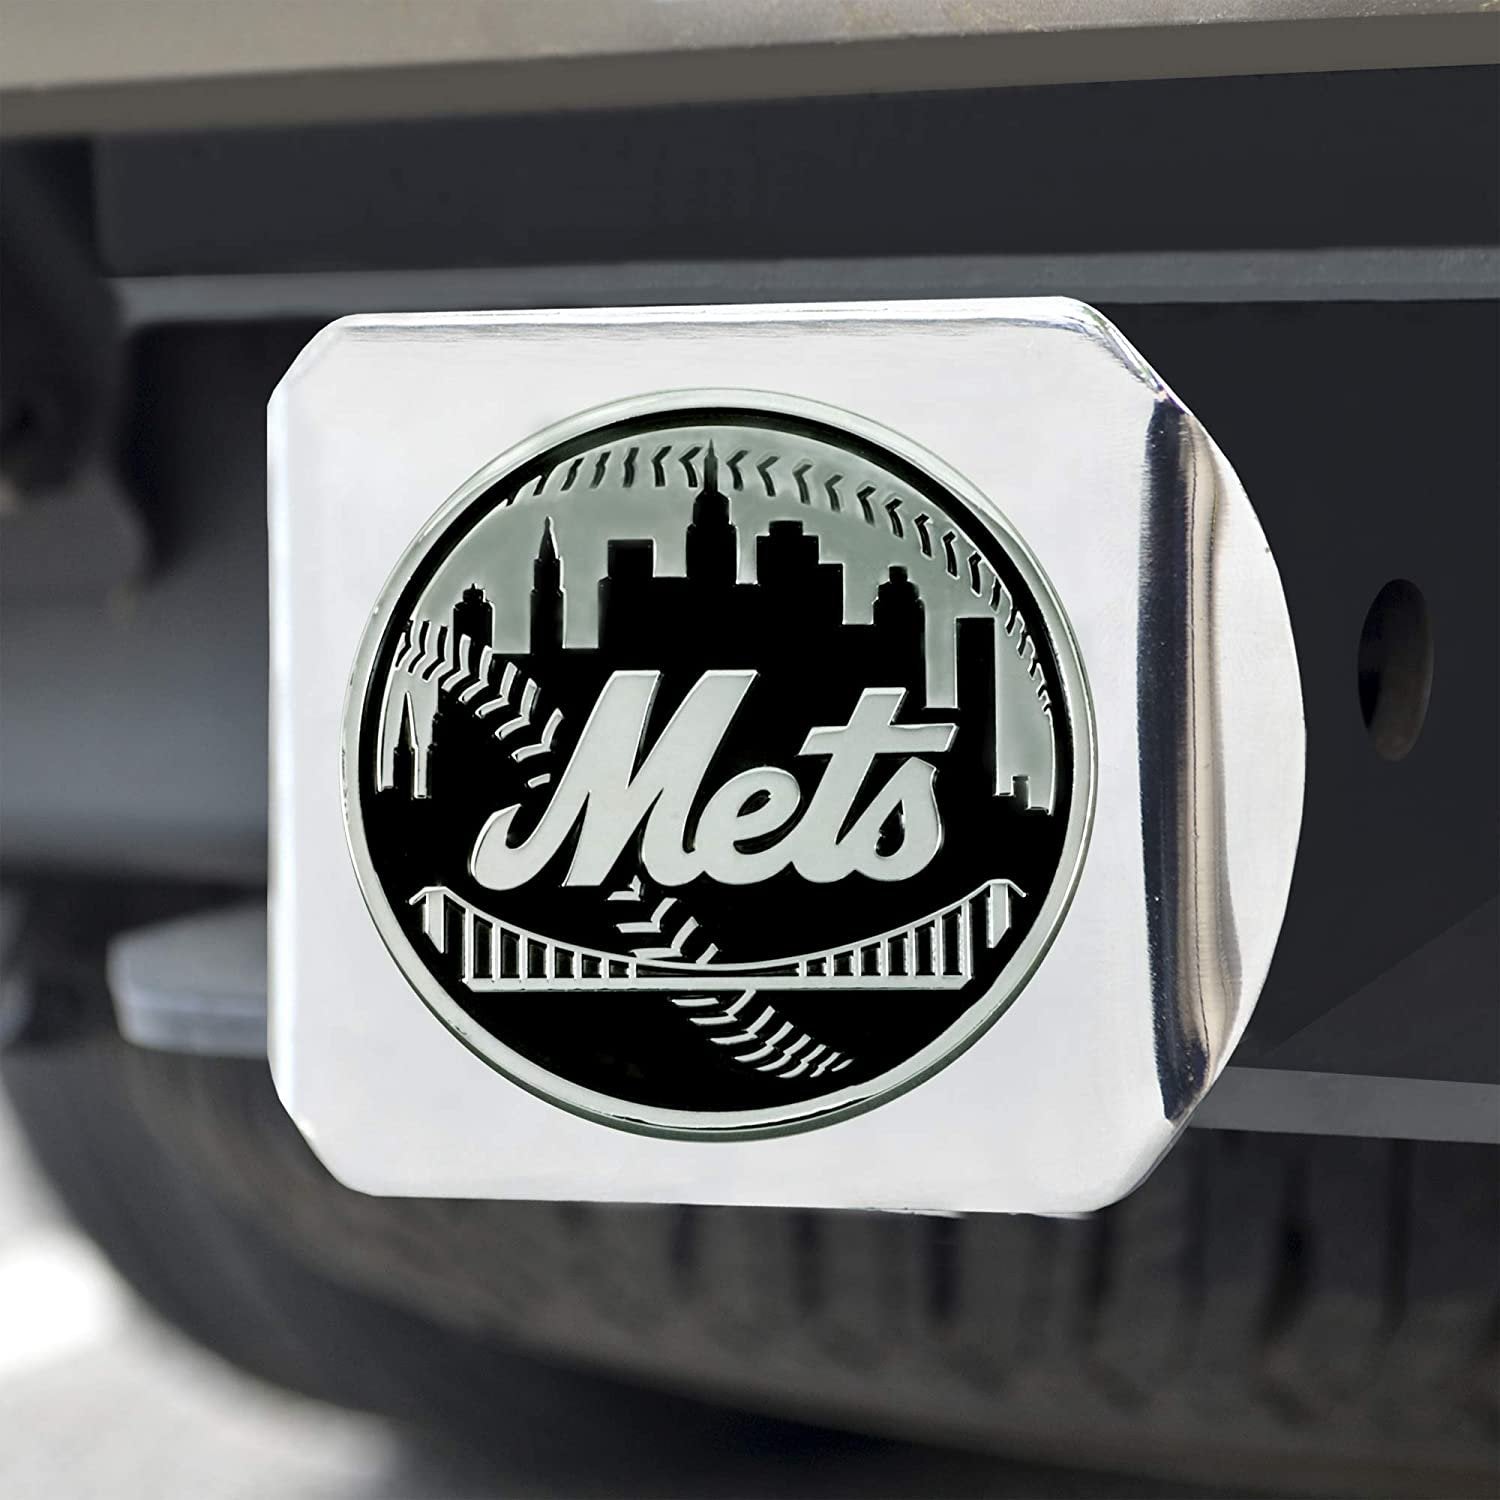 New York Mets Hitch Cover Solid Metal with Raised Chrome Metal Emblem 2" Square Type III